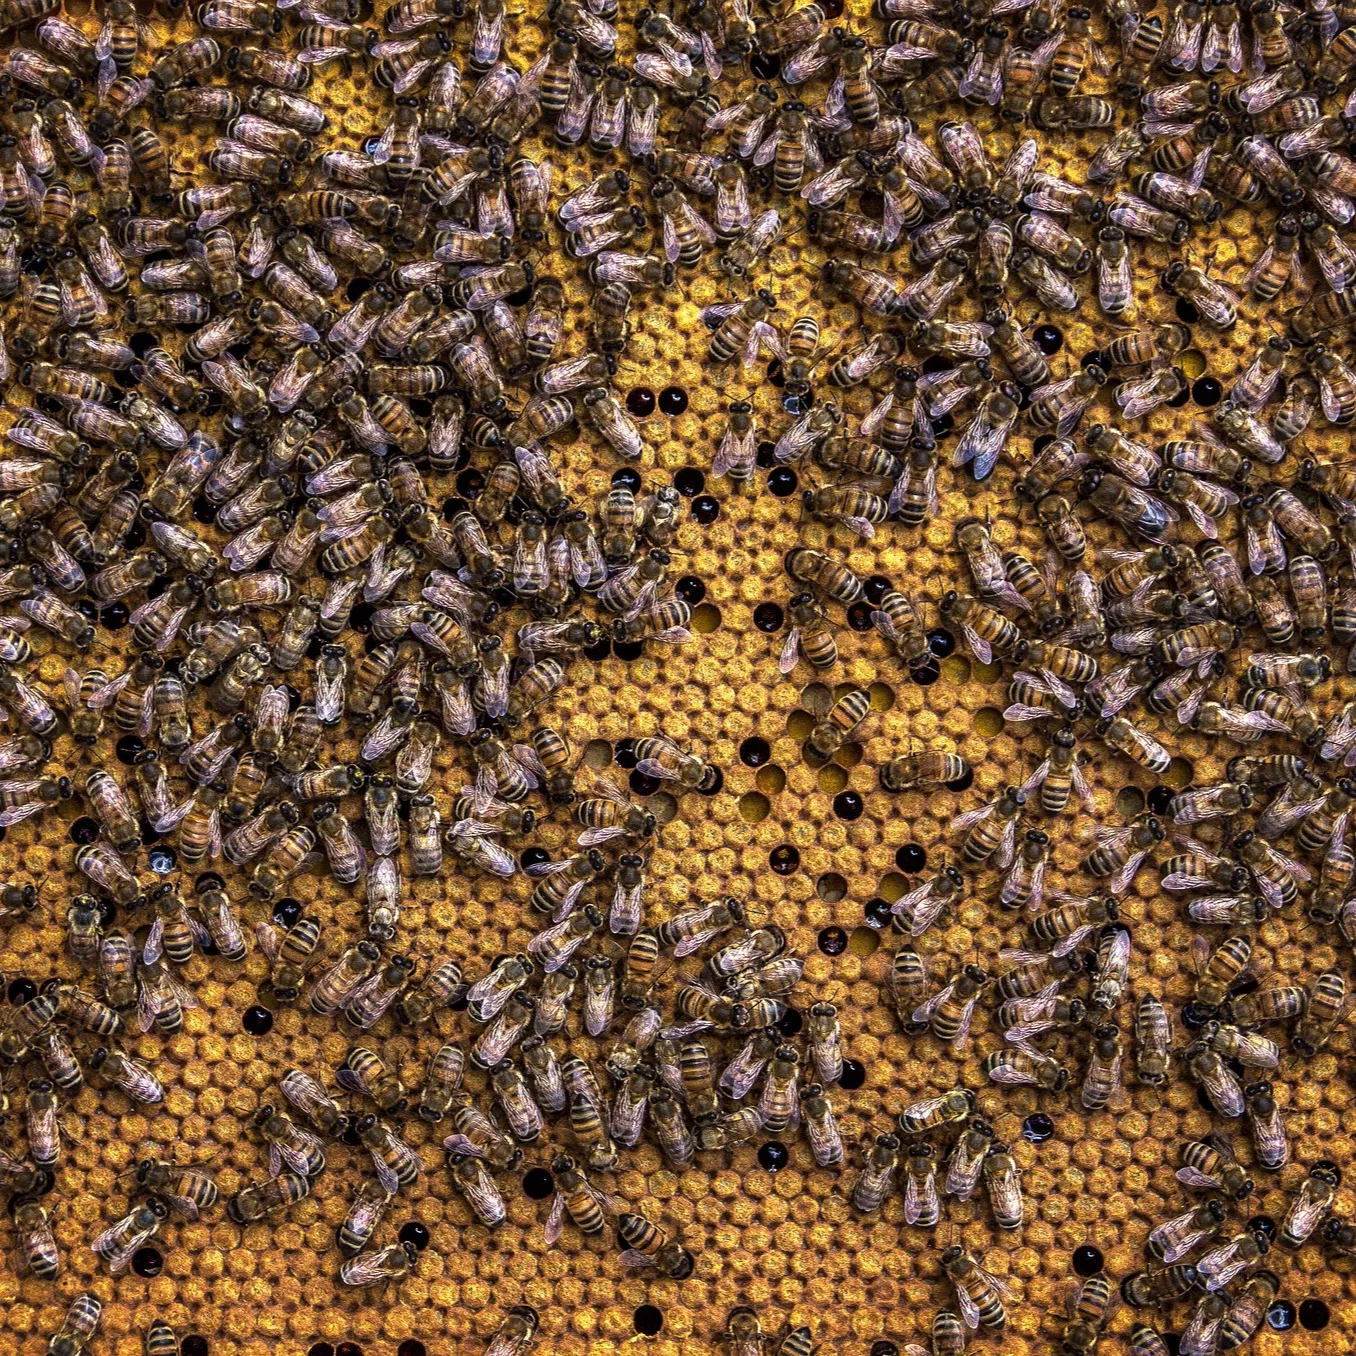 The rise of bee activism – how these humble insects have inspired a mass movement